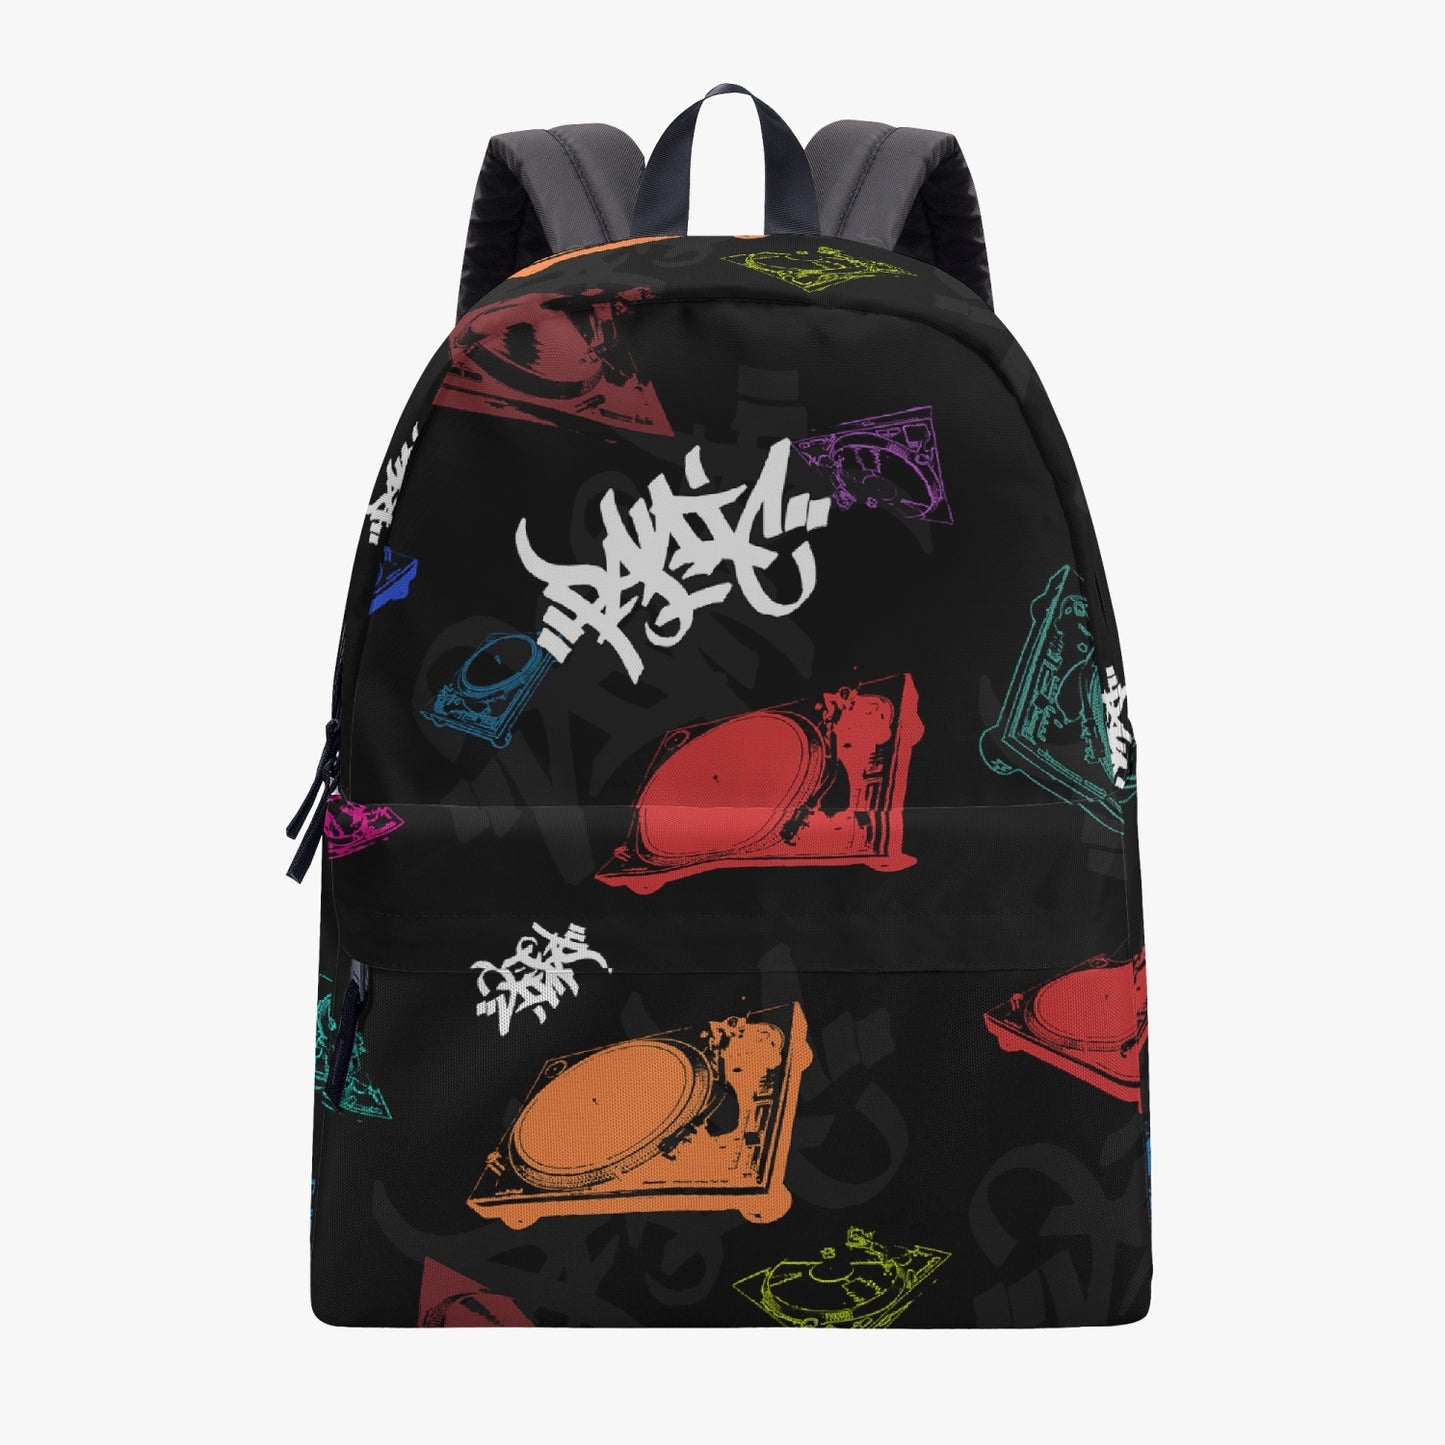 THE TURNTABLE CANVAS BACKPACK